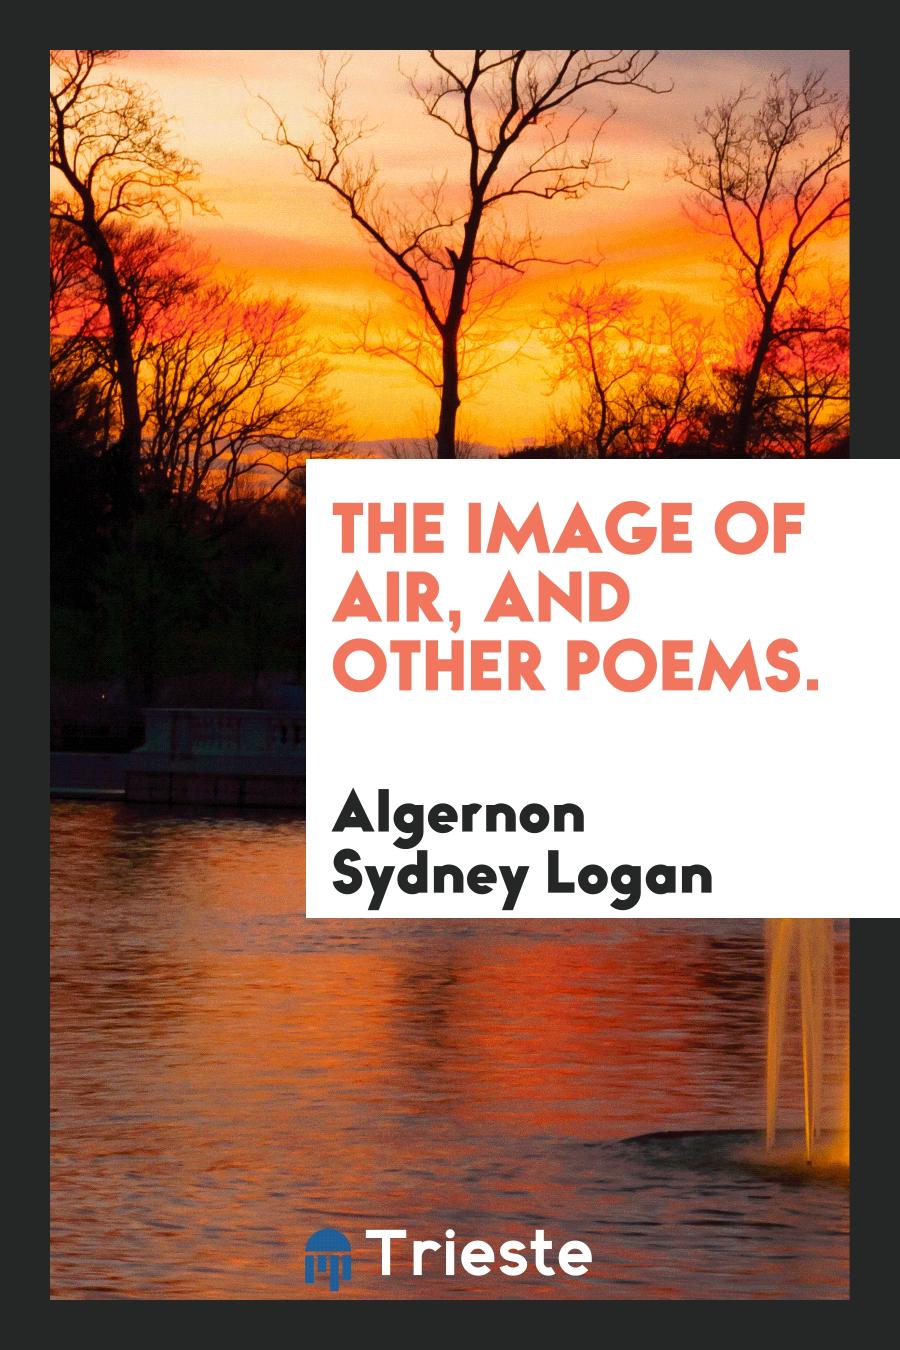 The image of air, and other poems.